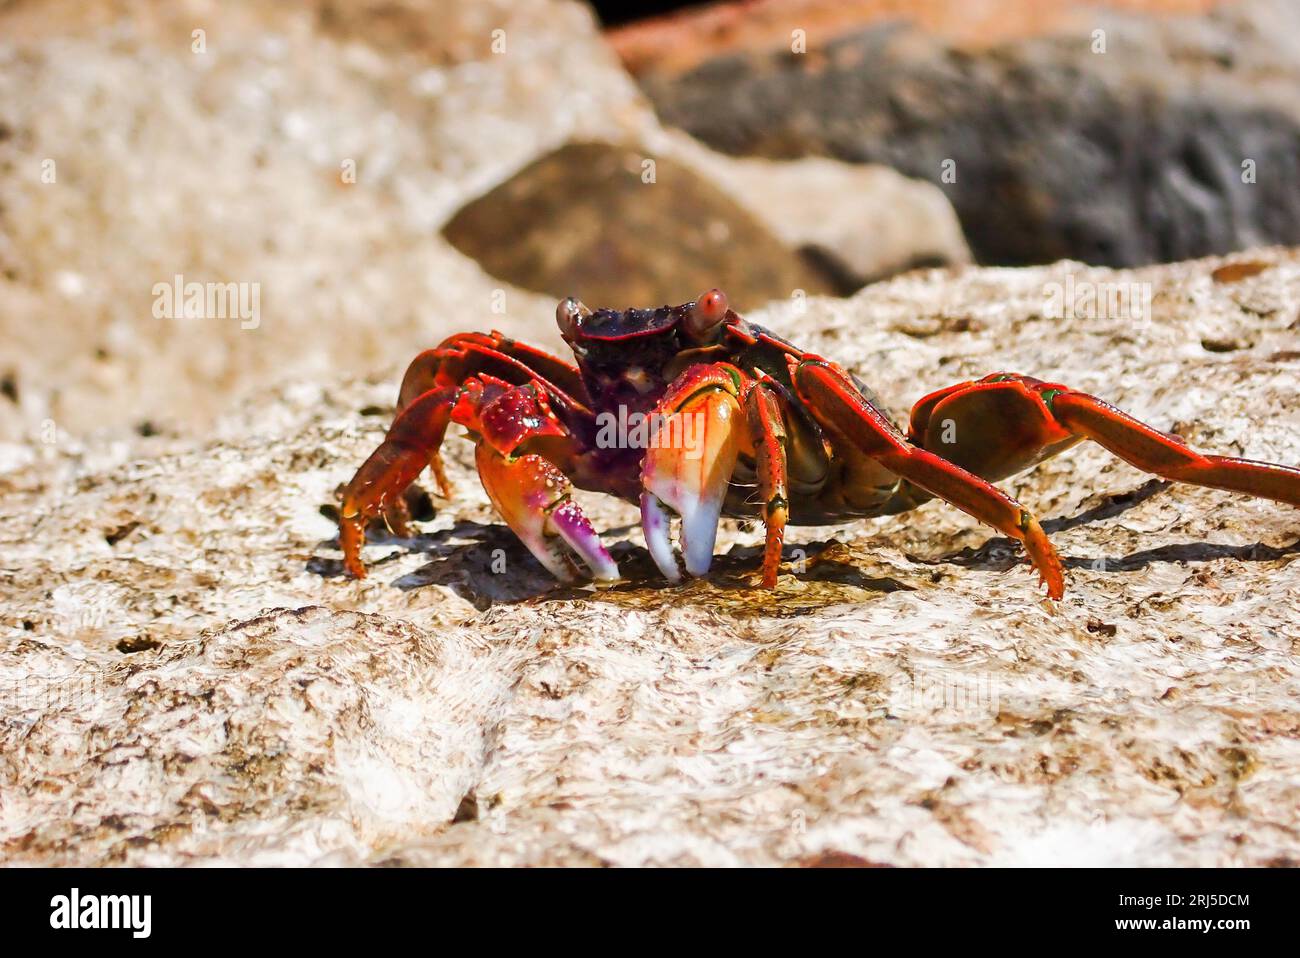 260 Crab Mallet Royalty-Free Photos and Stock Images